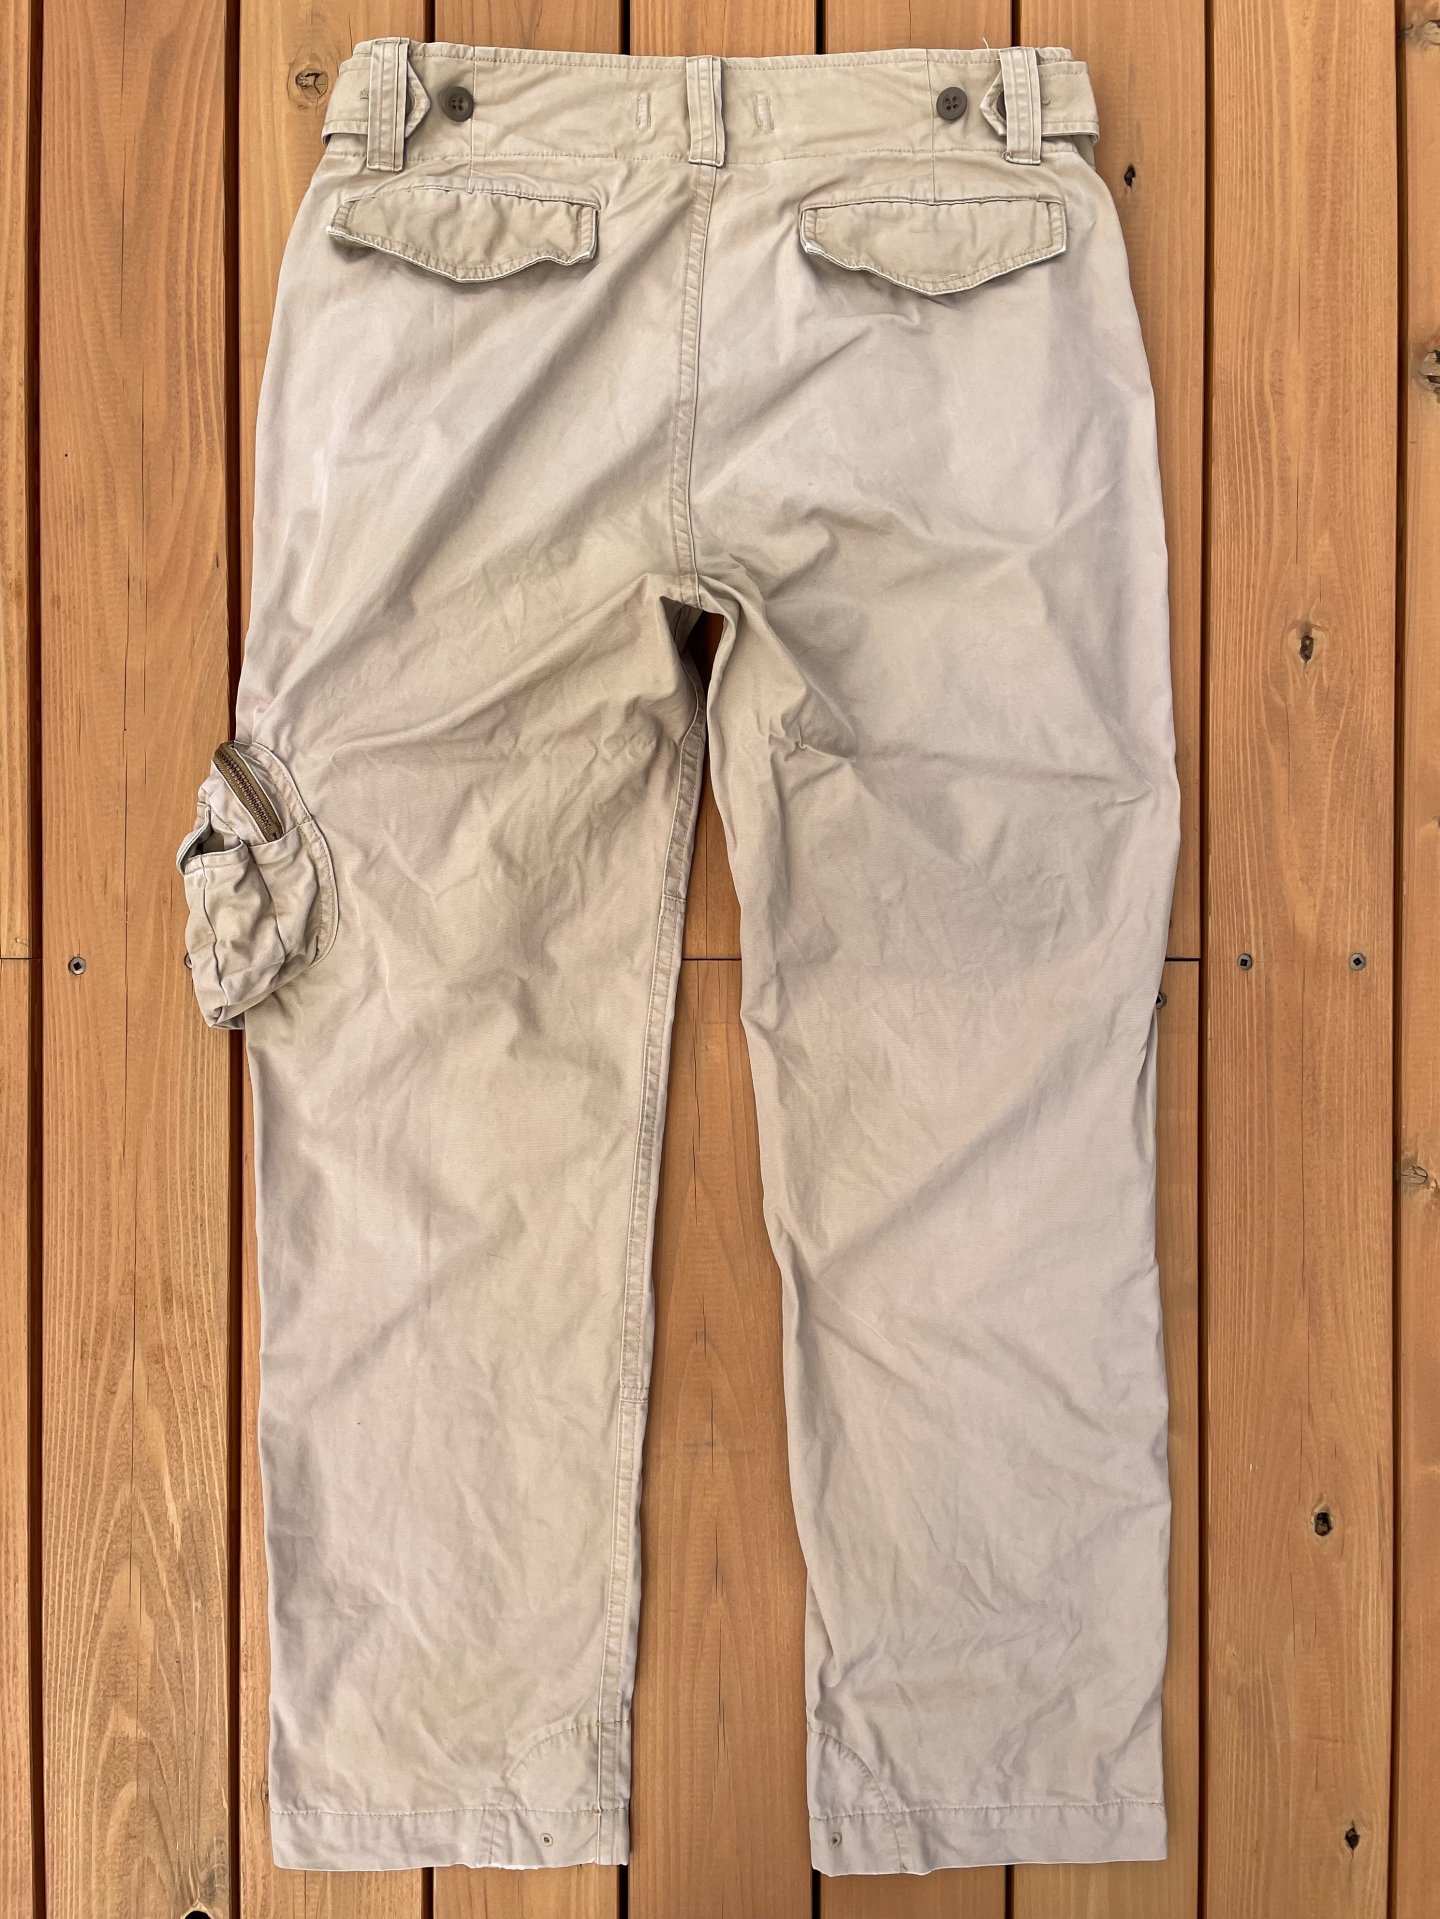 VINTAGE "Polo by Ralph Lauren" CARGO PANTs - container